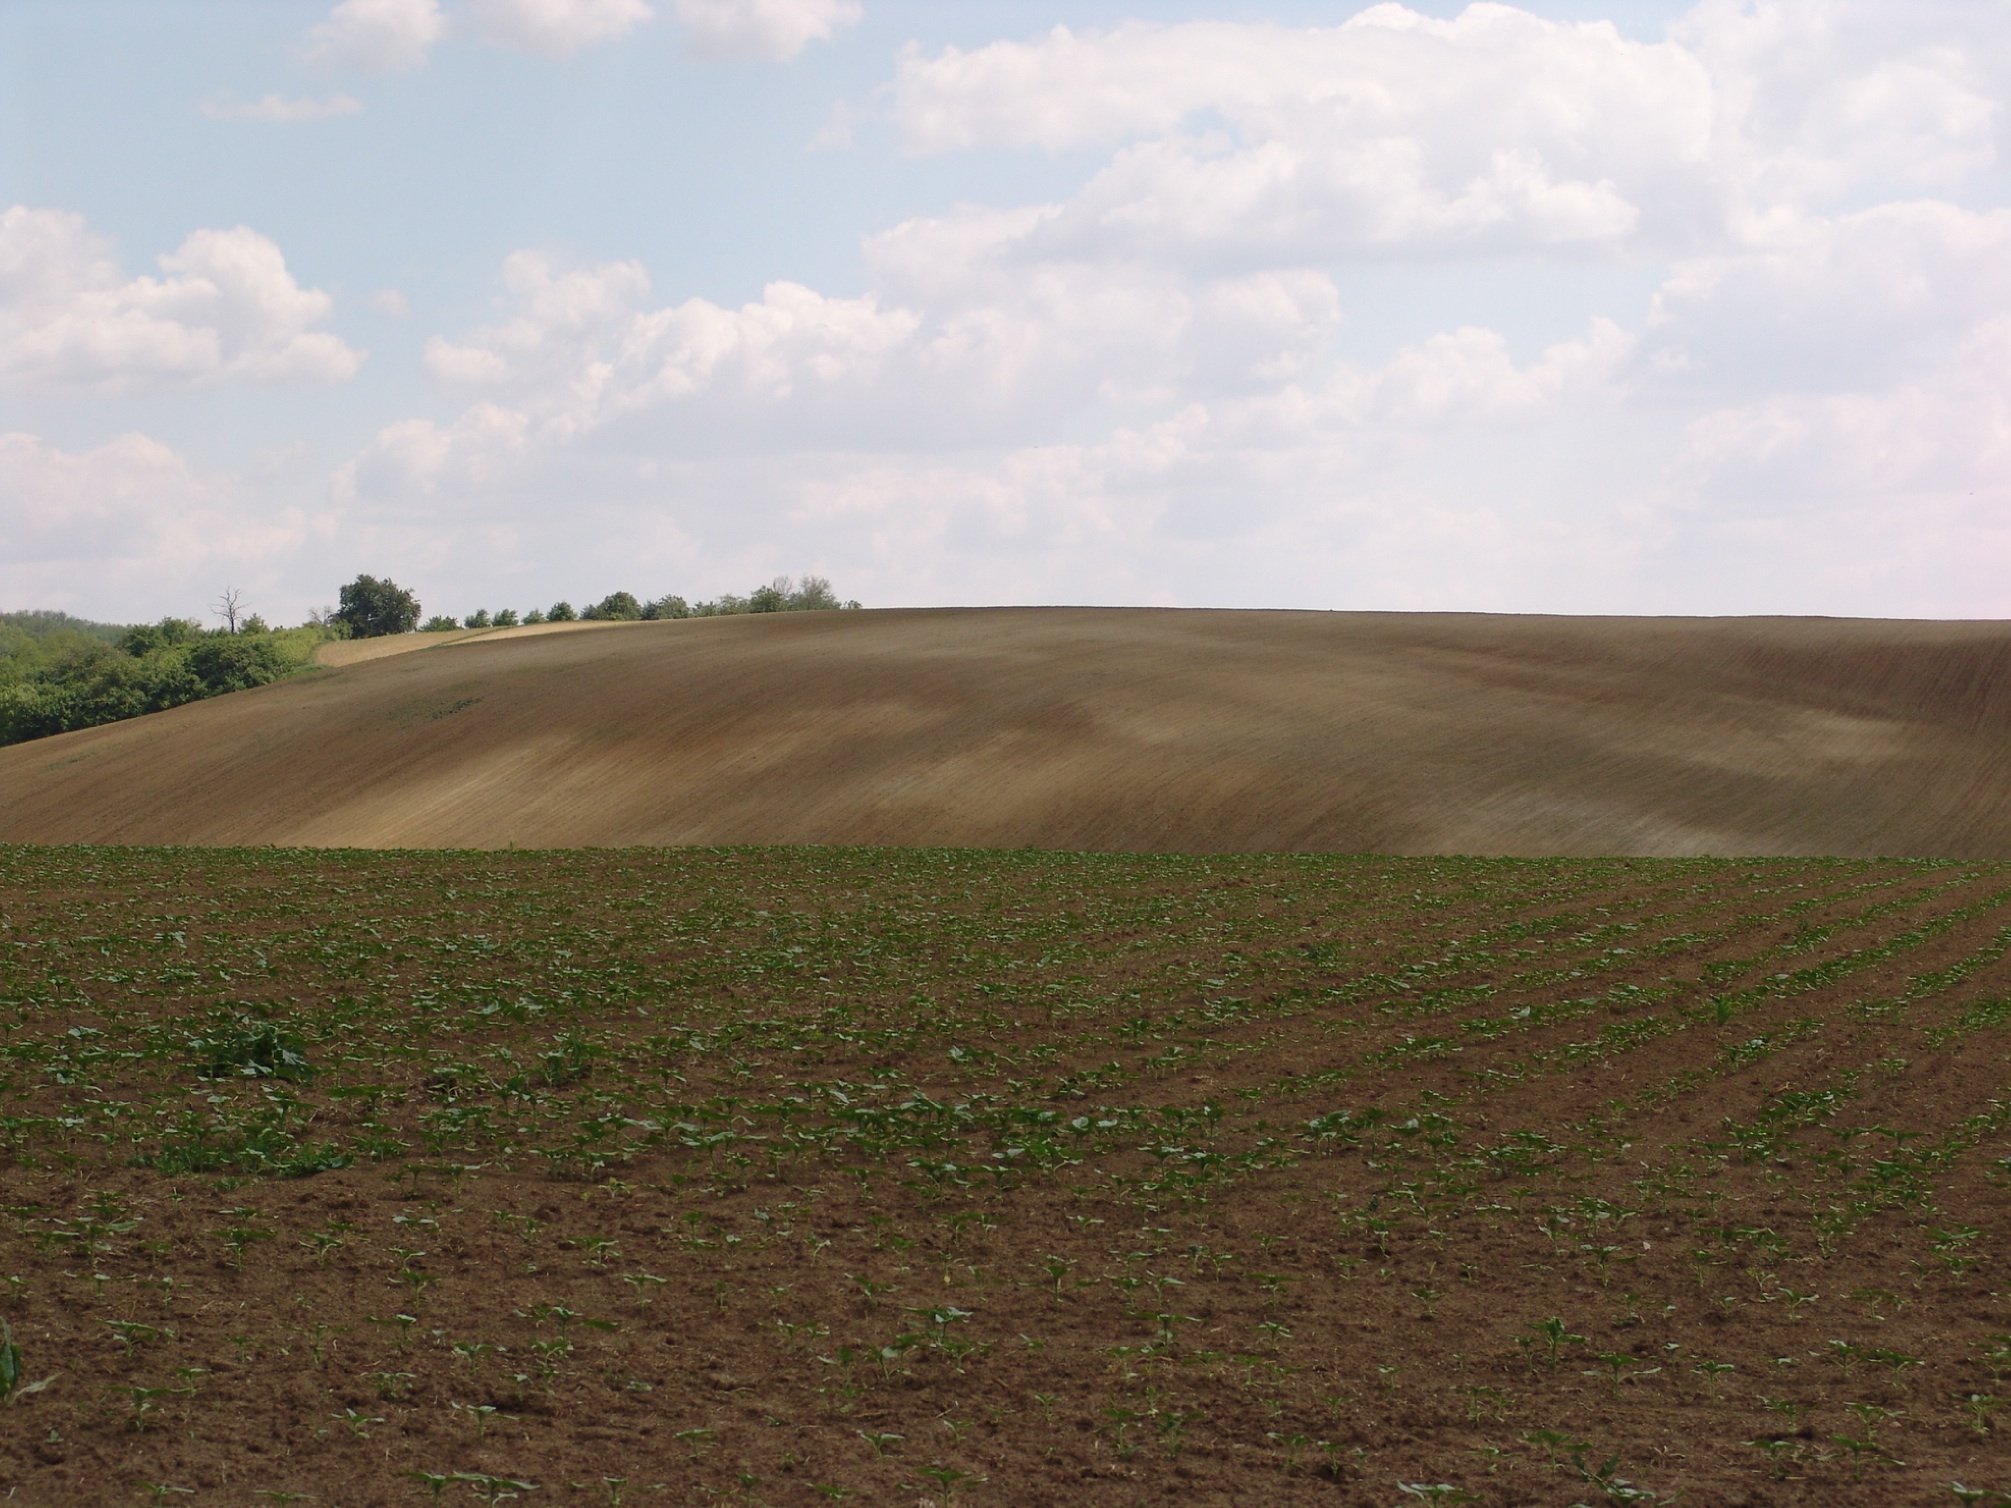 Soil degradation: bare surface caused by intensive cultivation at Martonfa, Southern Baranya Hills. photo by Gábor Varga